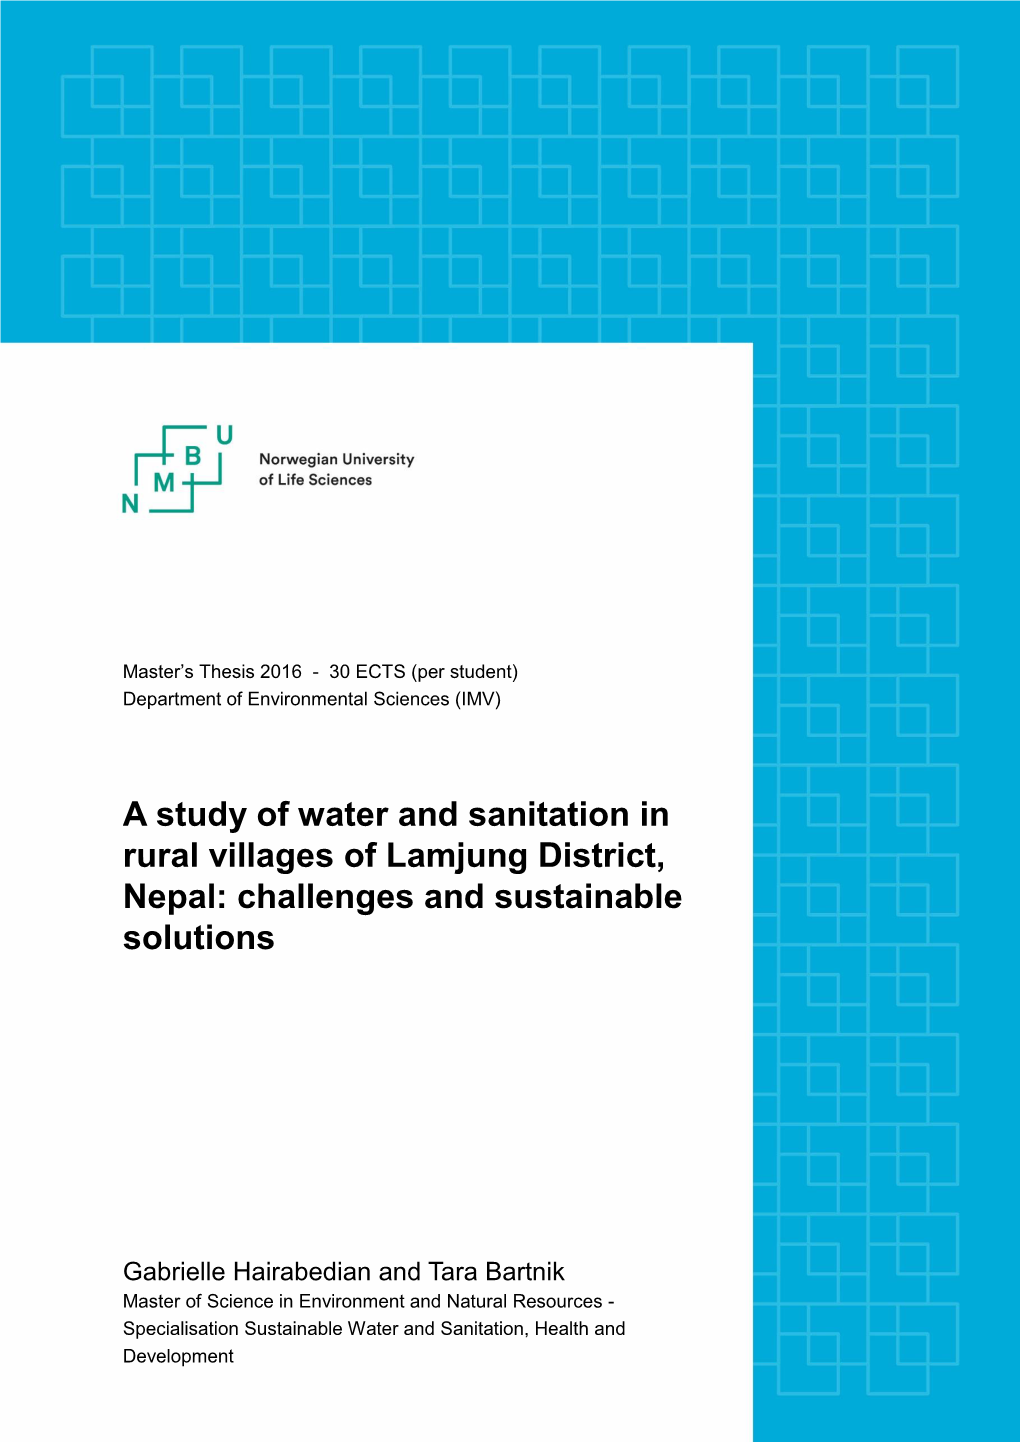 A Study of Water and Sanitation in Rural Villages of Lamjung District, Nepal: Challenges and Sustainable Solutions